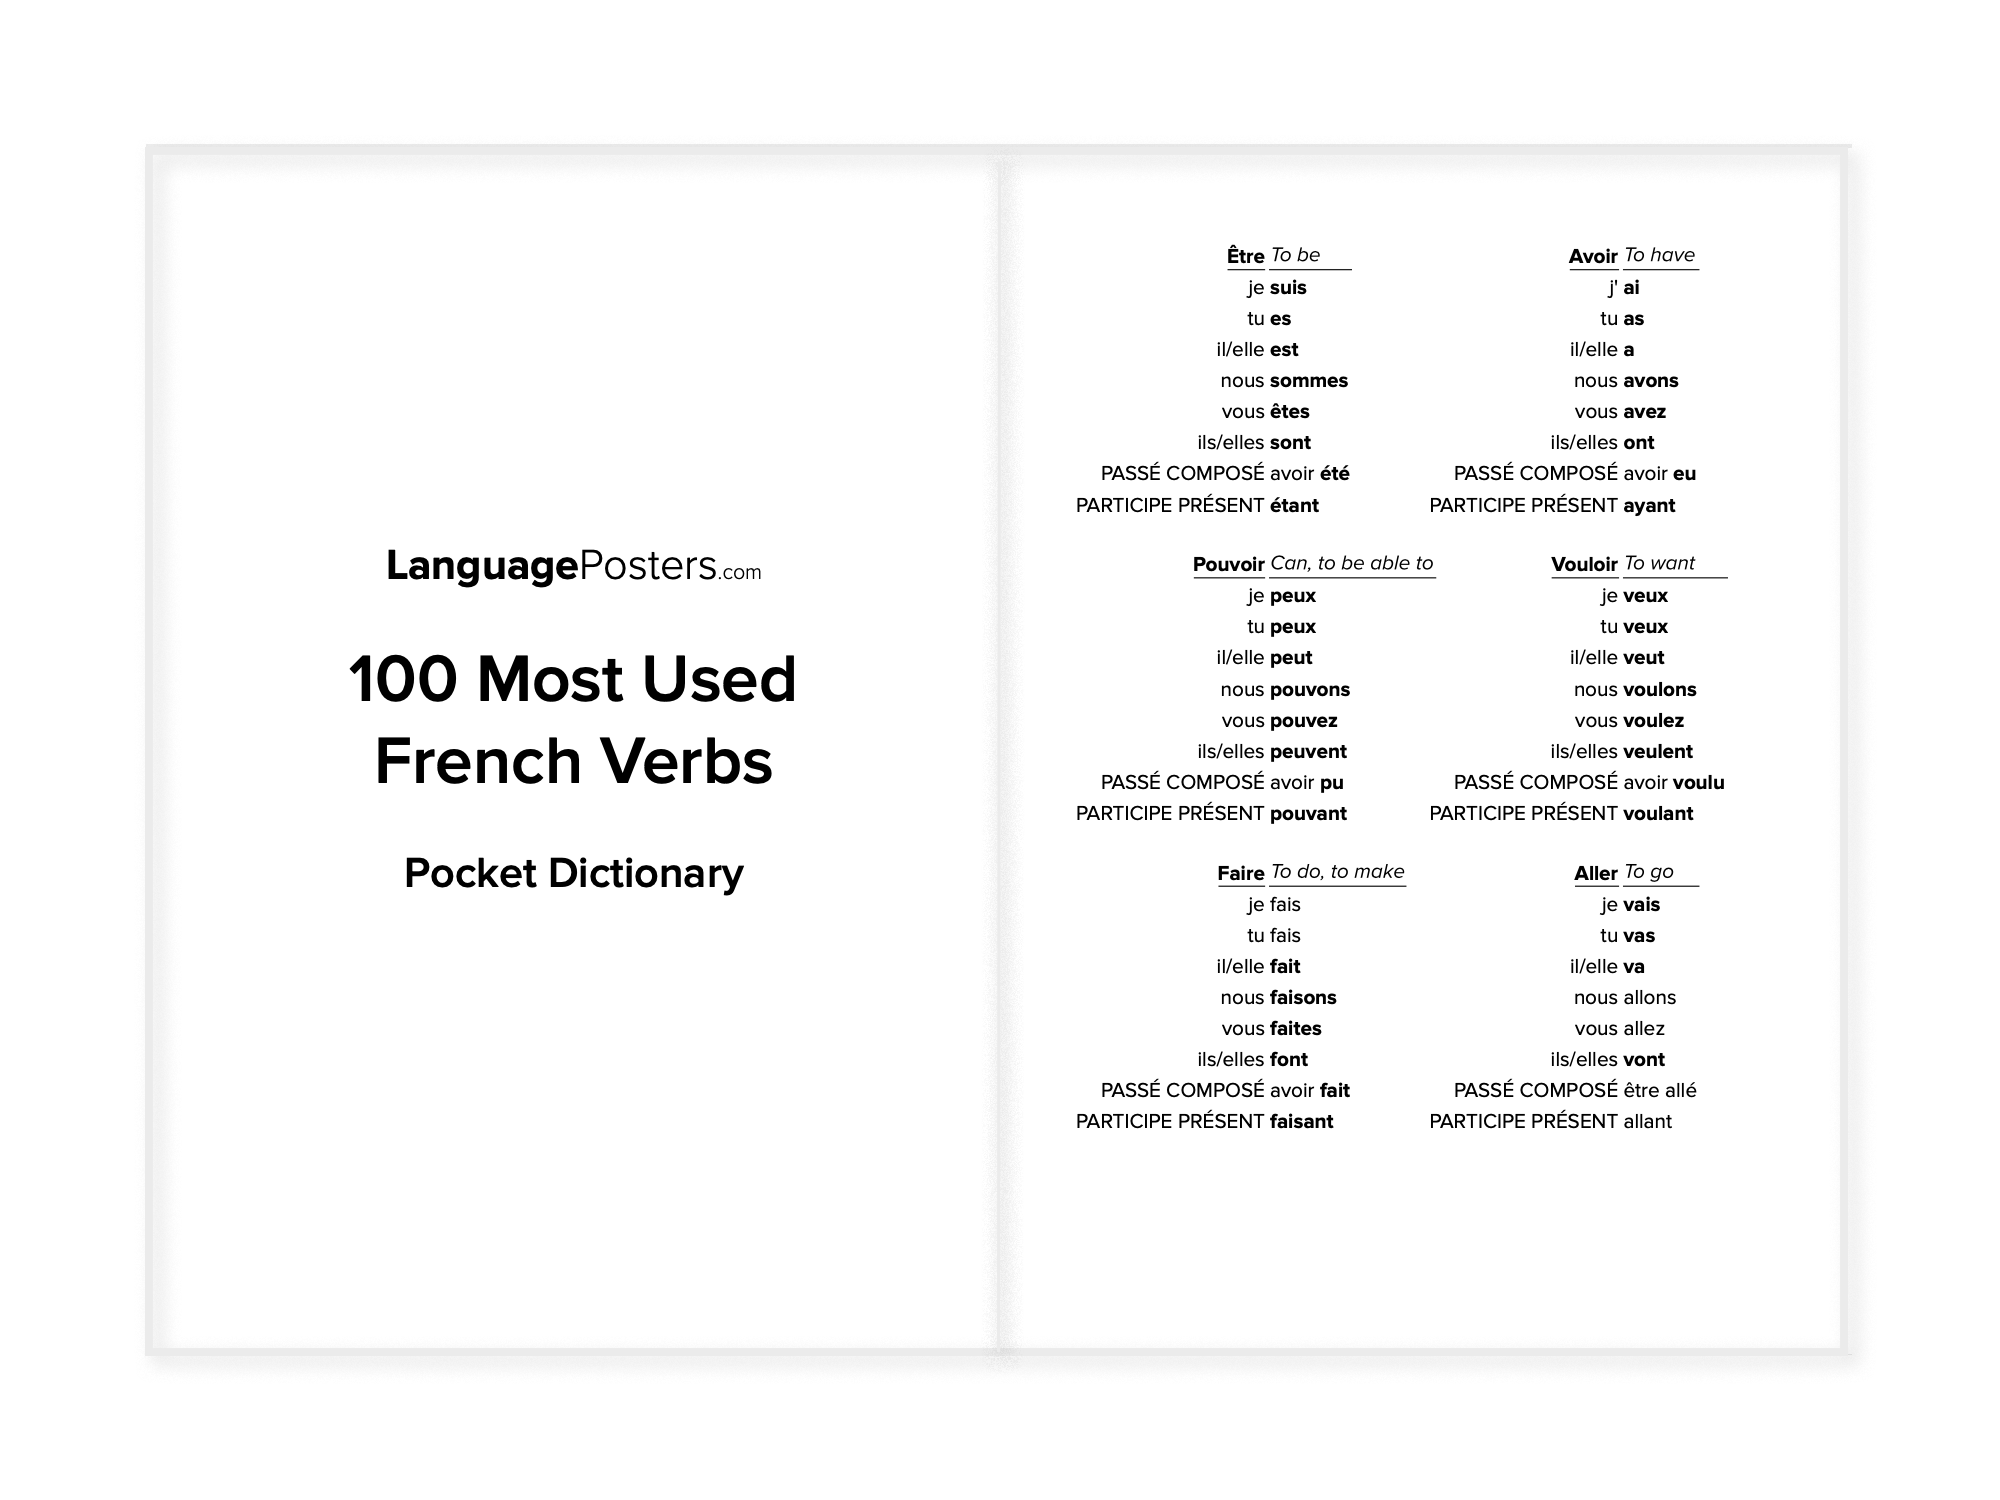 LanguagePosters.com - 100 Most Used French Verbs Pocket Dictionary Preview